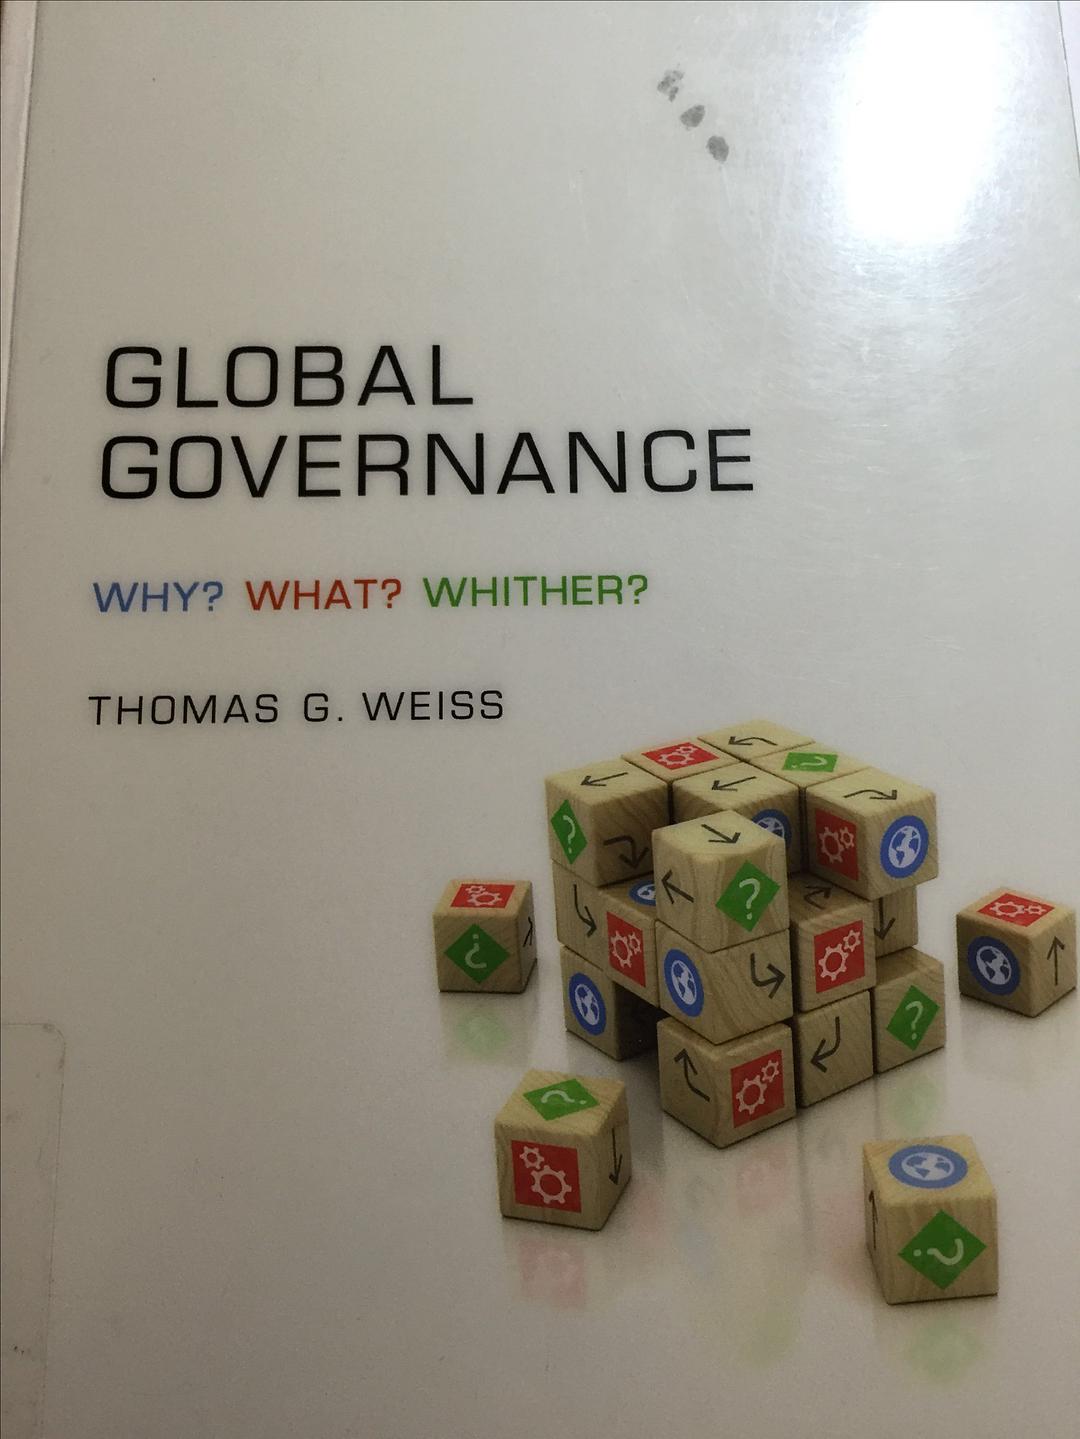 Global governance why? what? whither?